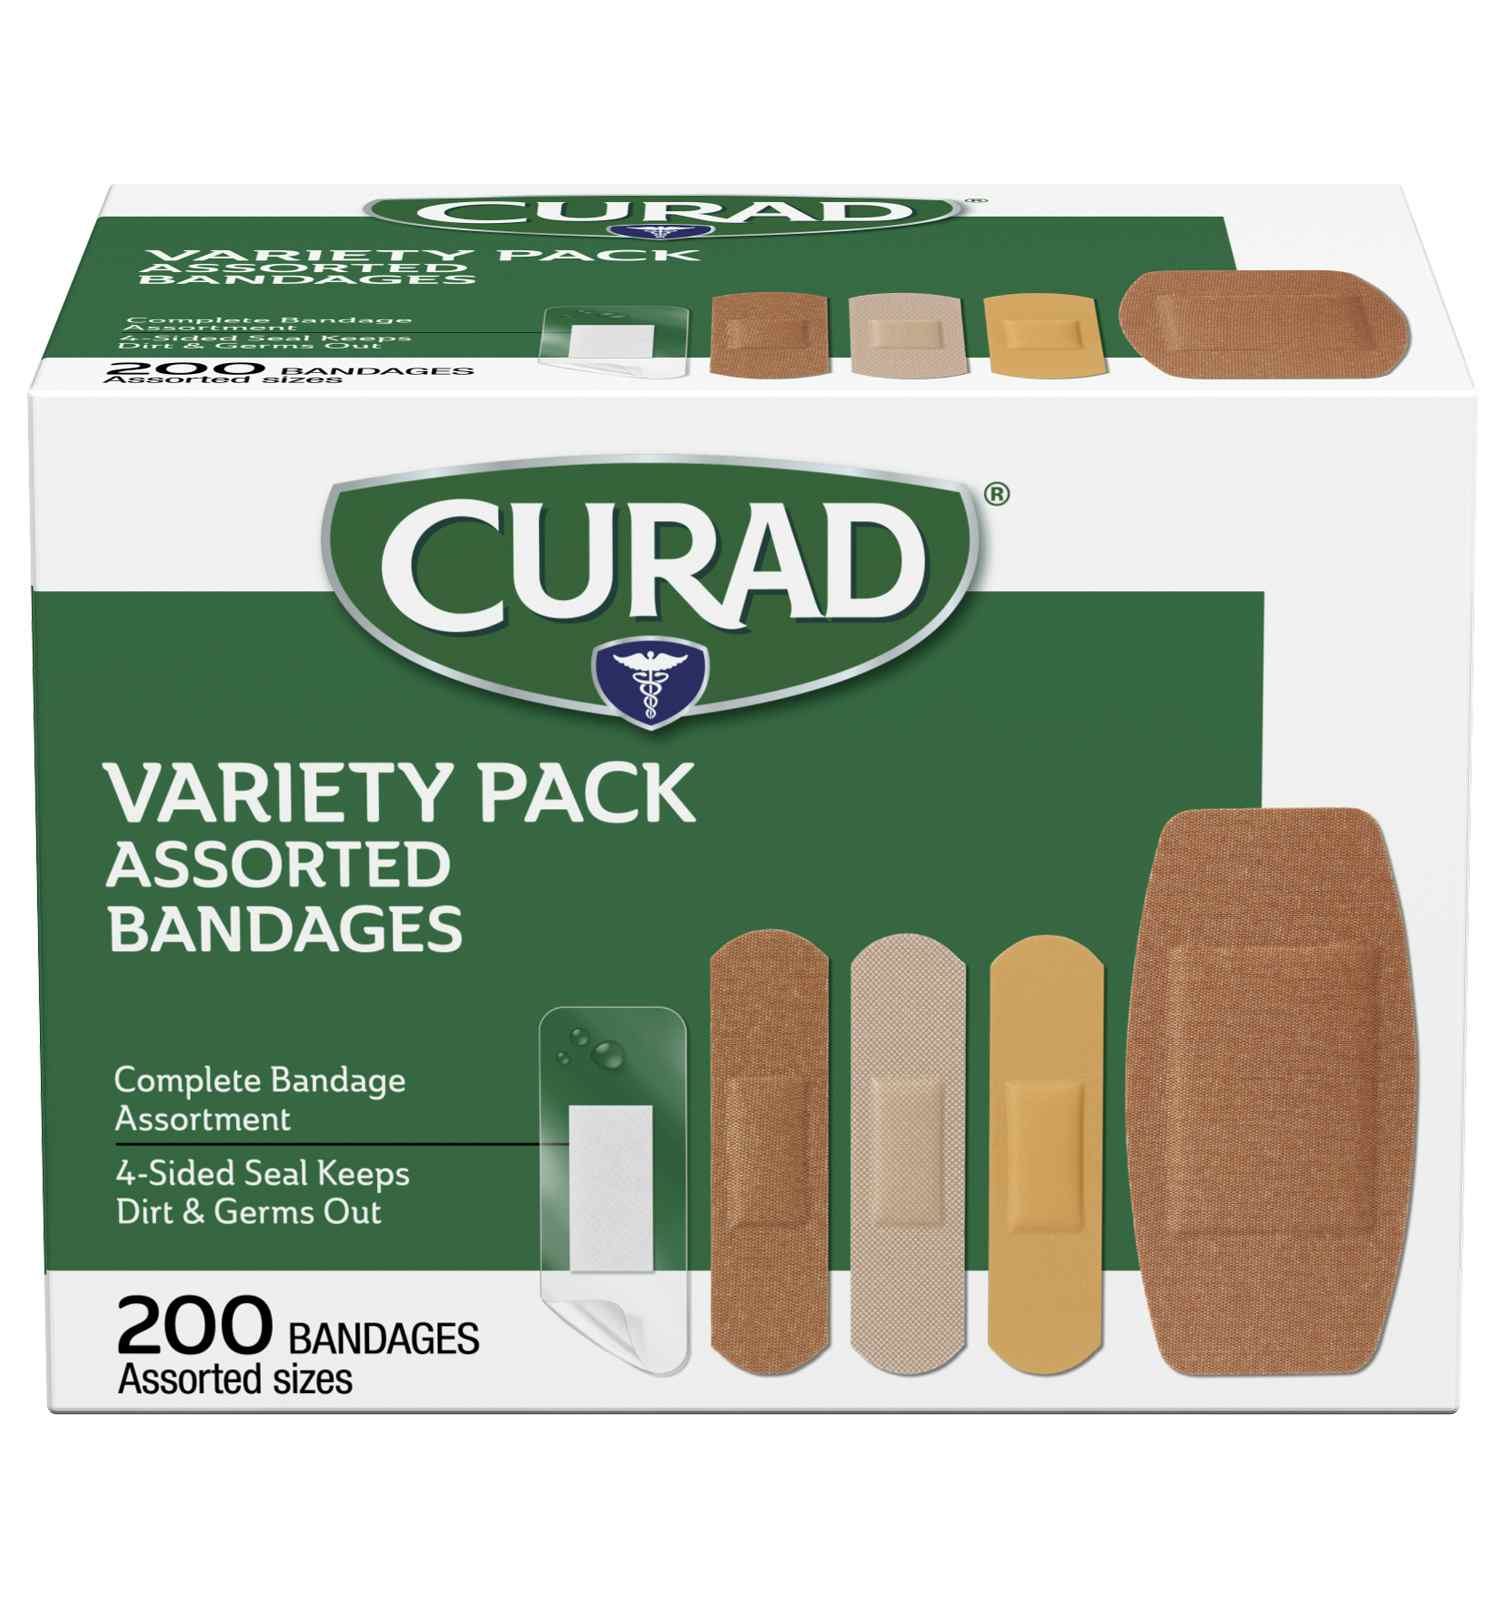 Curad Waterproof Variety Pack Bandages, CUR0800RBH, Box of 200